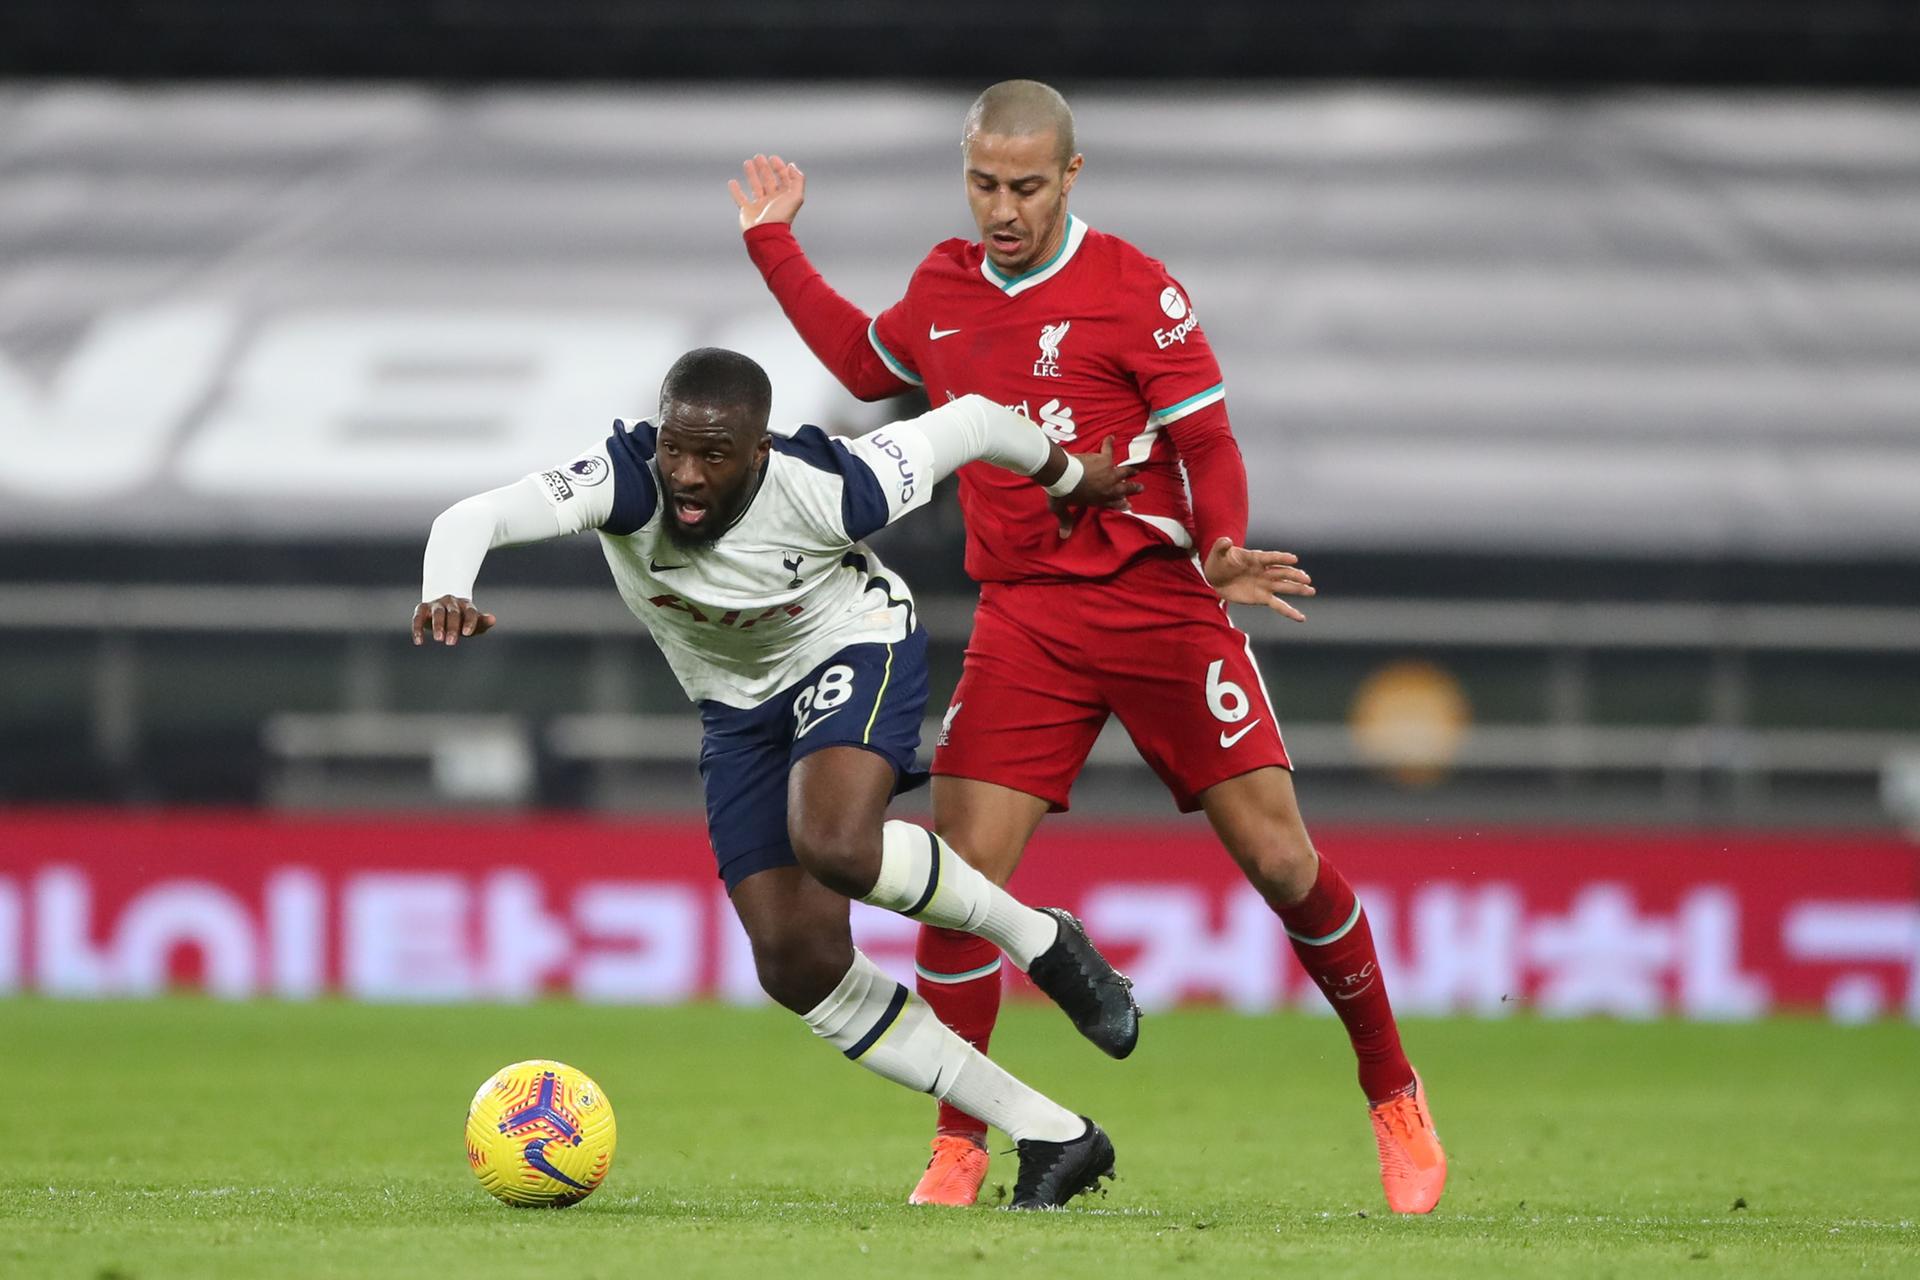 Tanguy Ndombele - 6. The midfielder started well, supplying a delicious ball for Son for the disallowed goal but he was over-run in the central areas. The Frenchman did not exert enough influence on the game. AFP